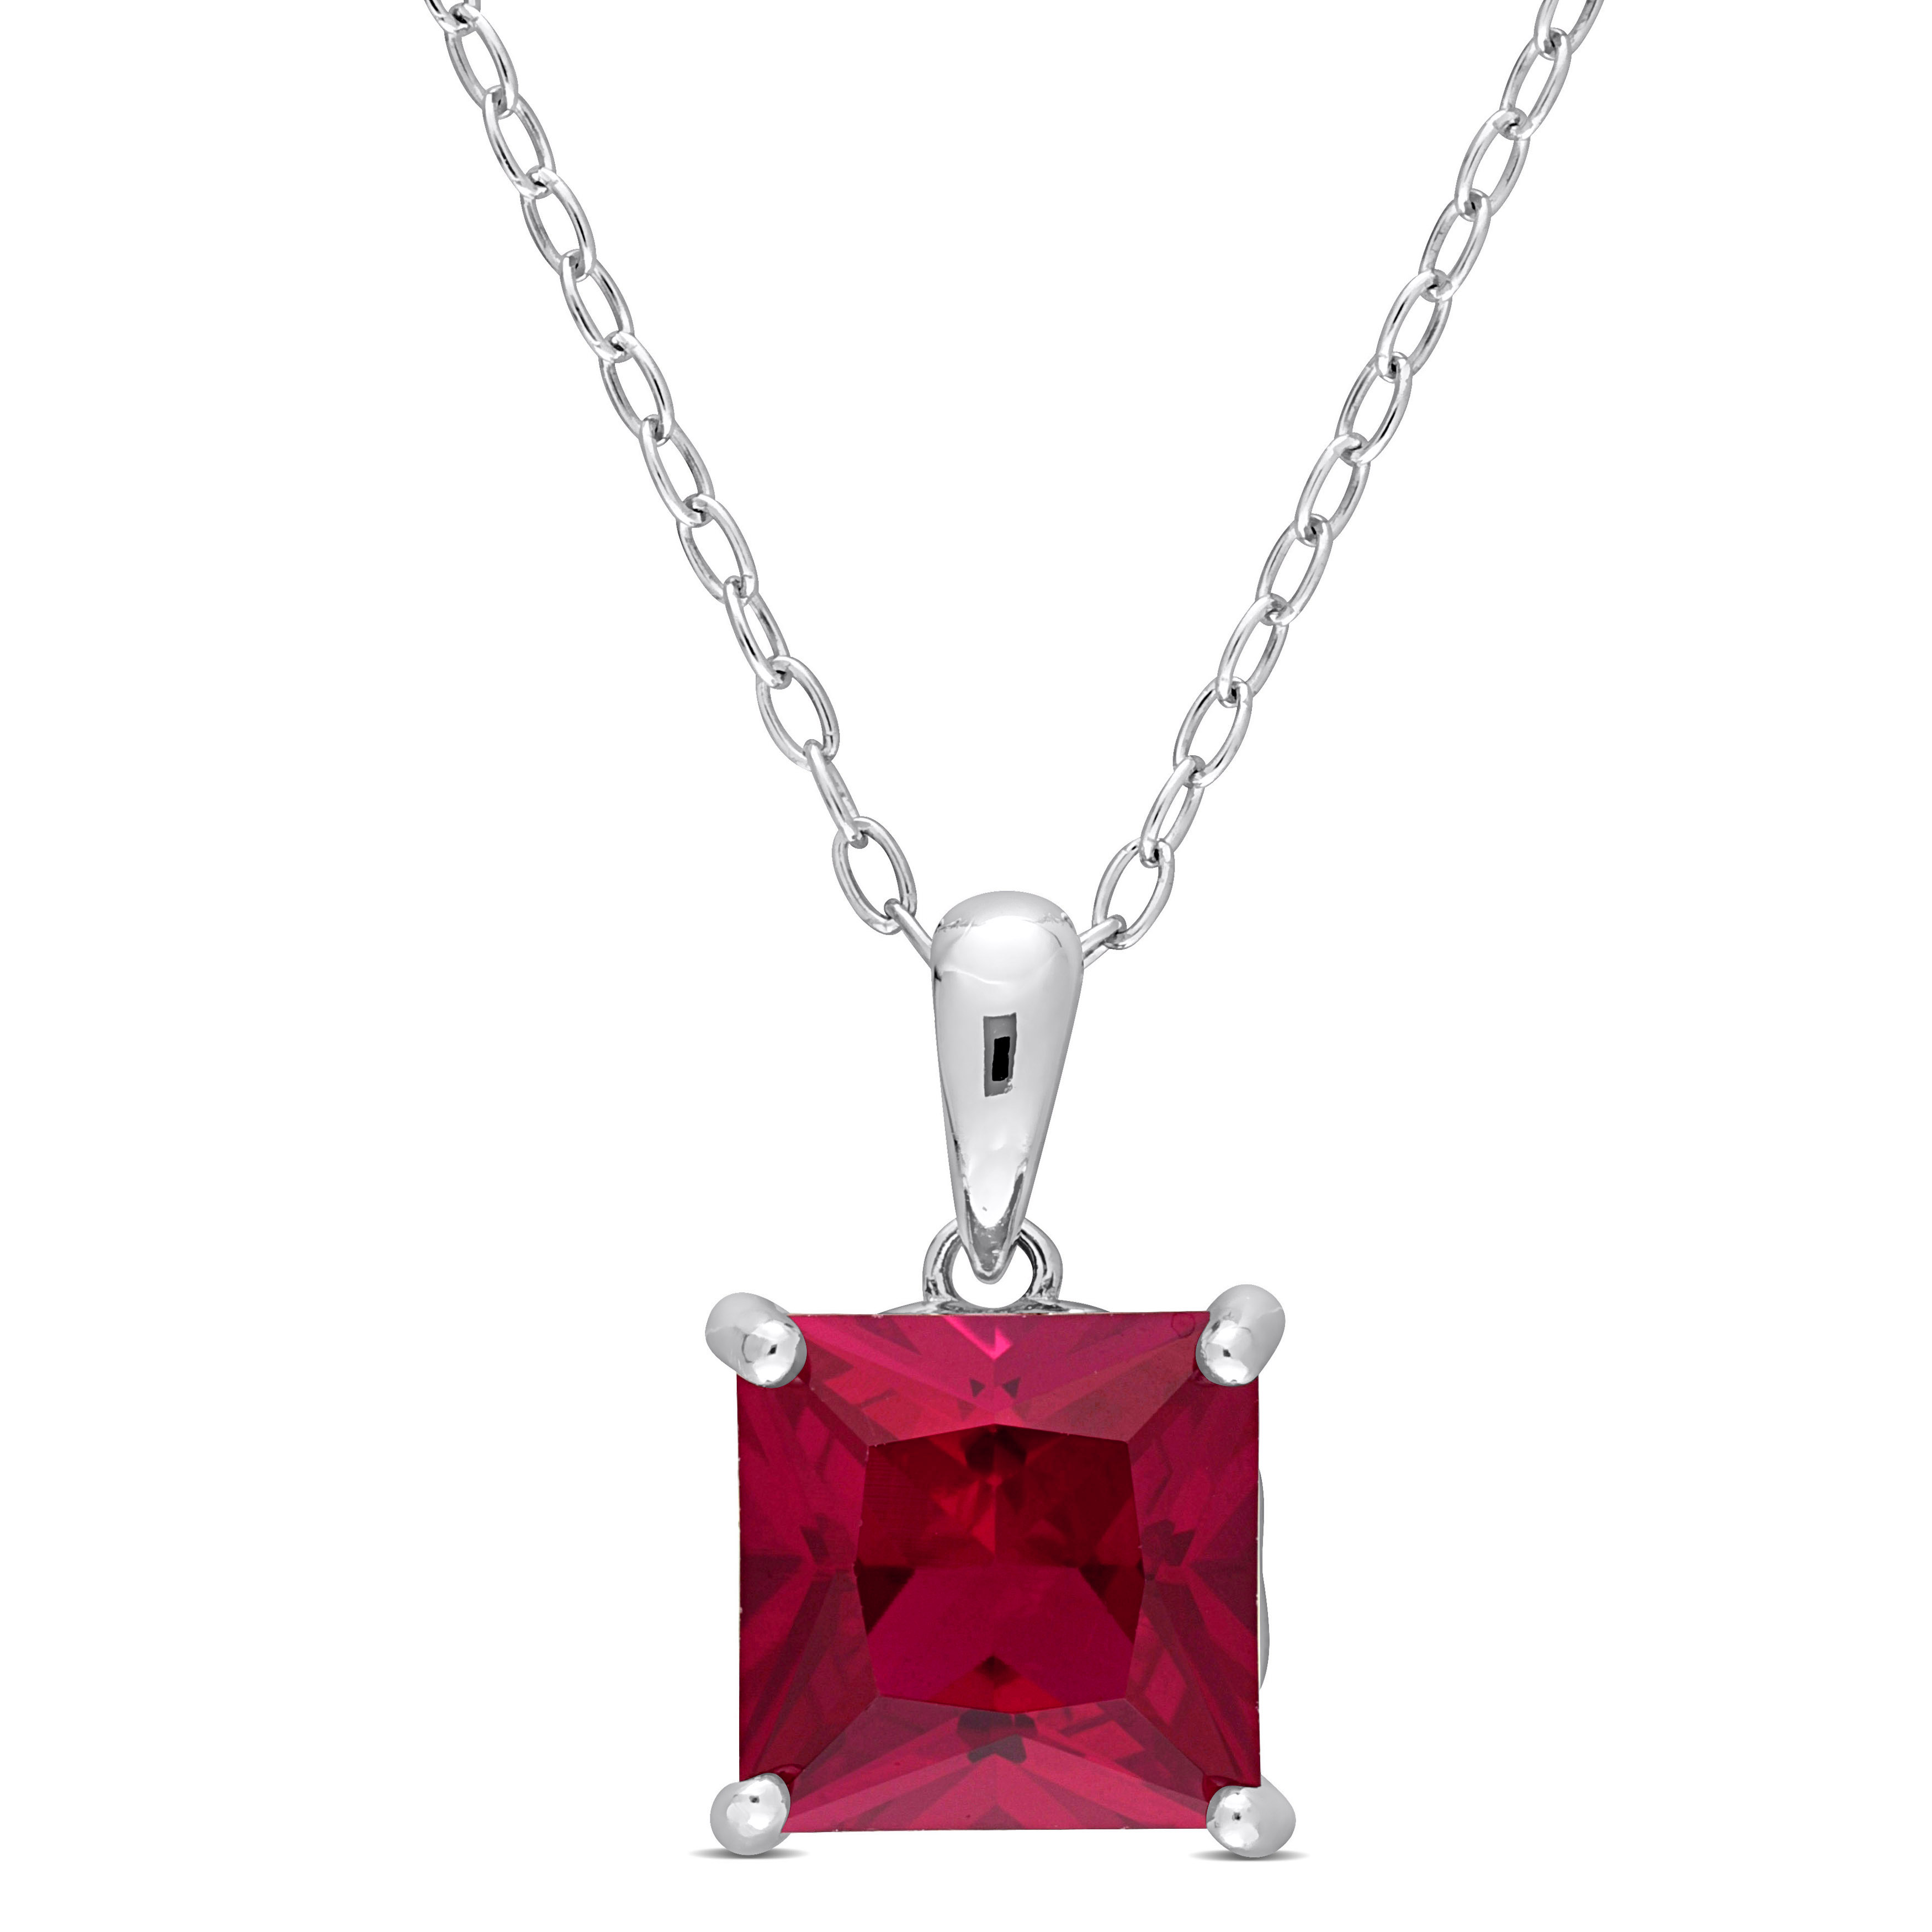 3.06 CT TGW Princess Cut Created Ruby Solitaire Heart Design Pendant with Chain in Sterling Silver - 18 in.